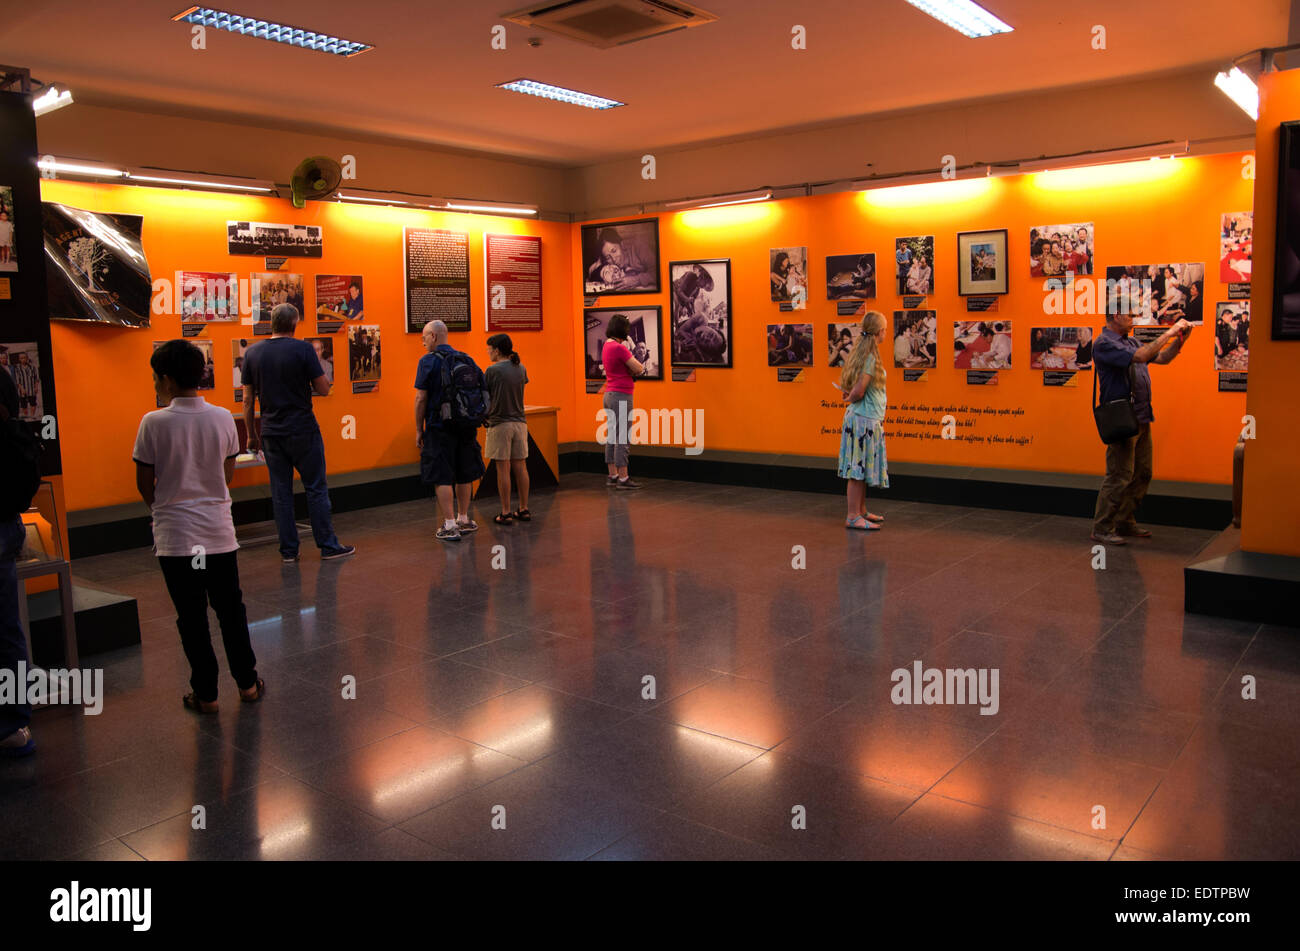 War Remnants Museum, Agent Orange Aftermath, people look at and photograph display, Saigon Ho Chi Minh City Stock Photo